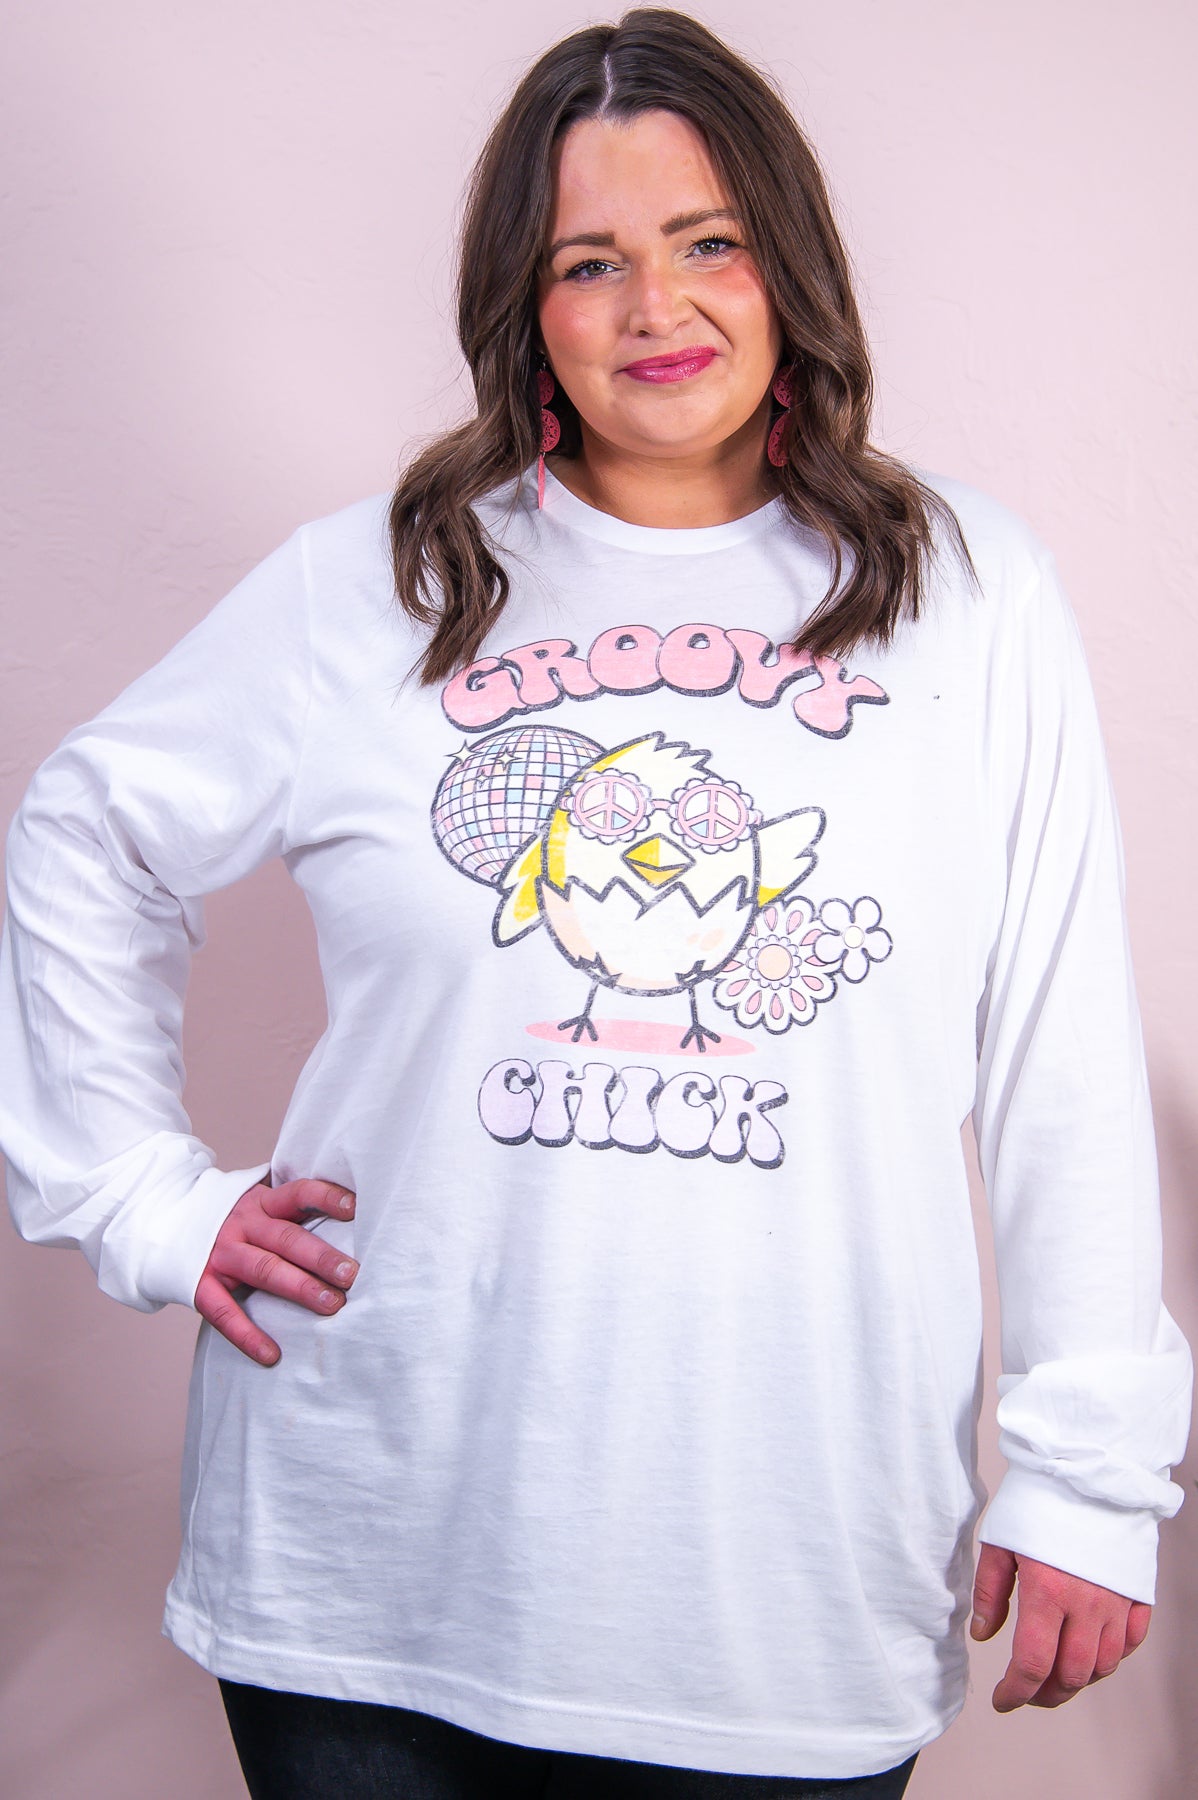 Groovy Chic White Long Sleeve Graphic Tee - A3239WH